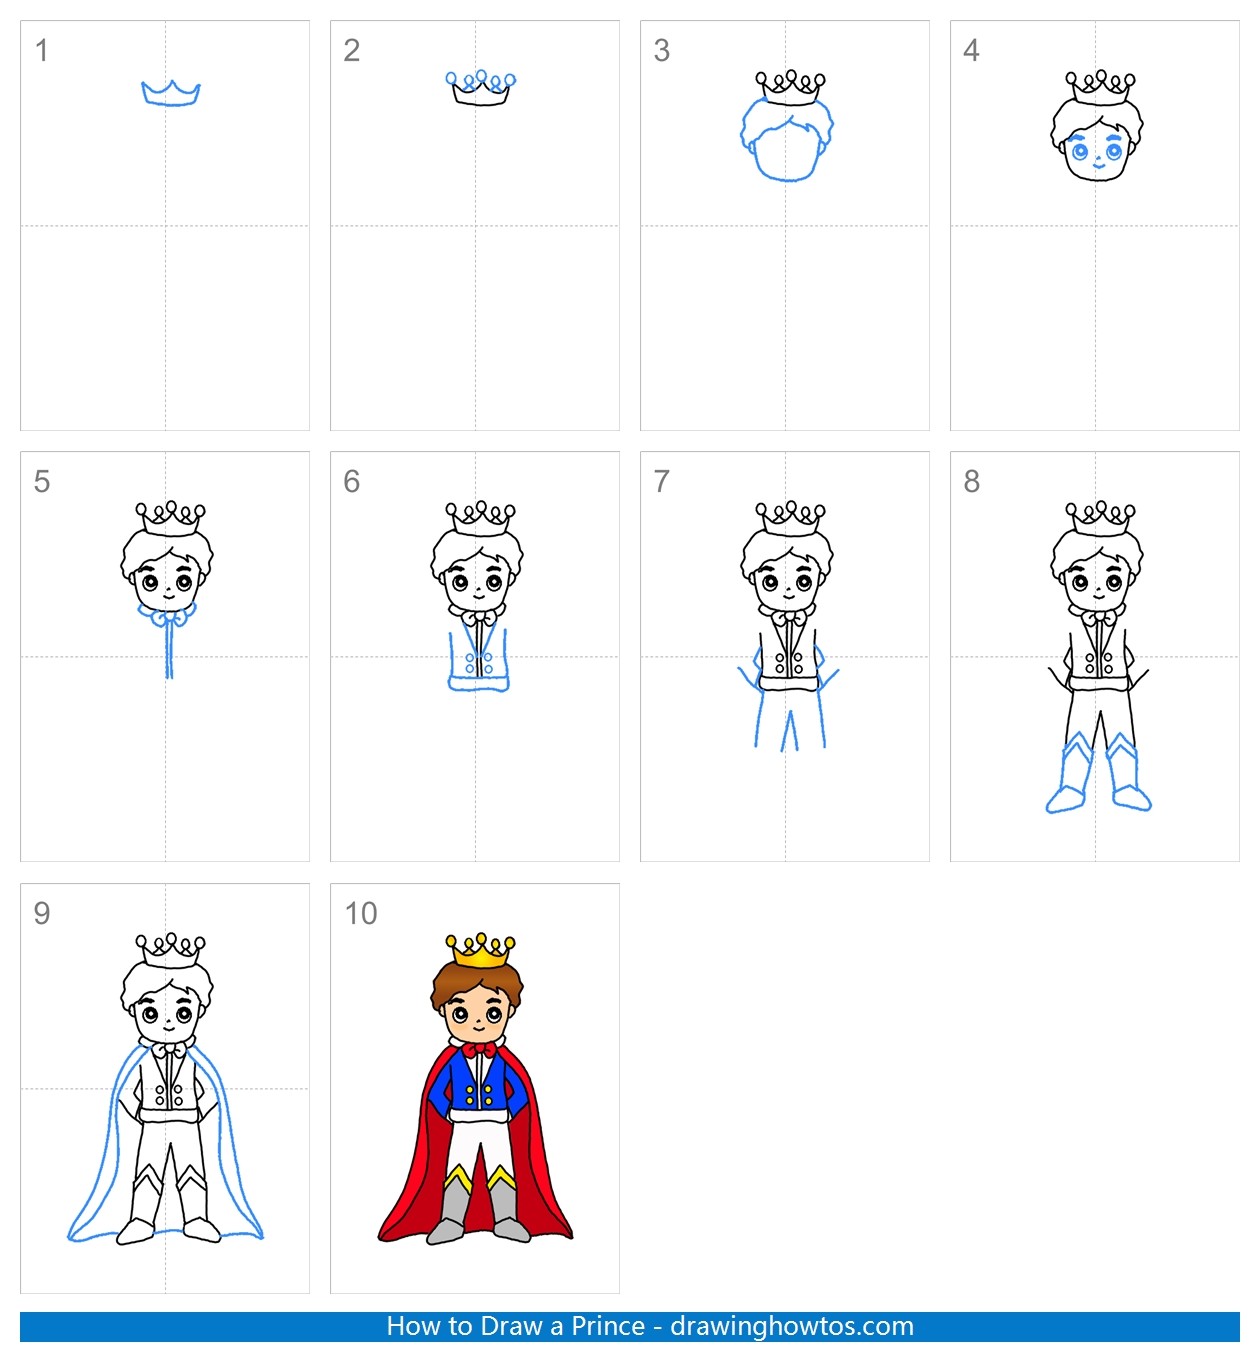 How to Draw a Prince Step by Step